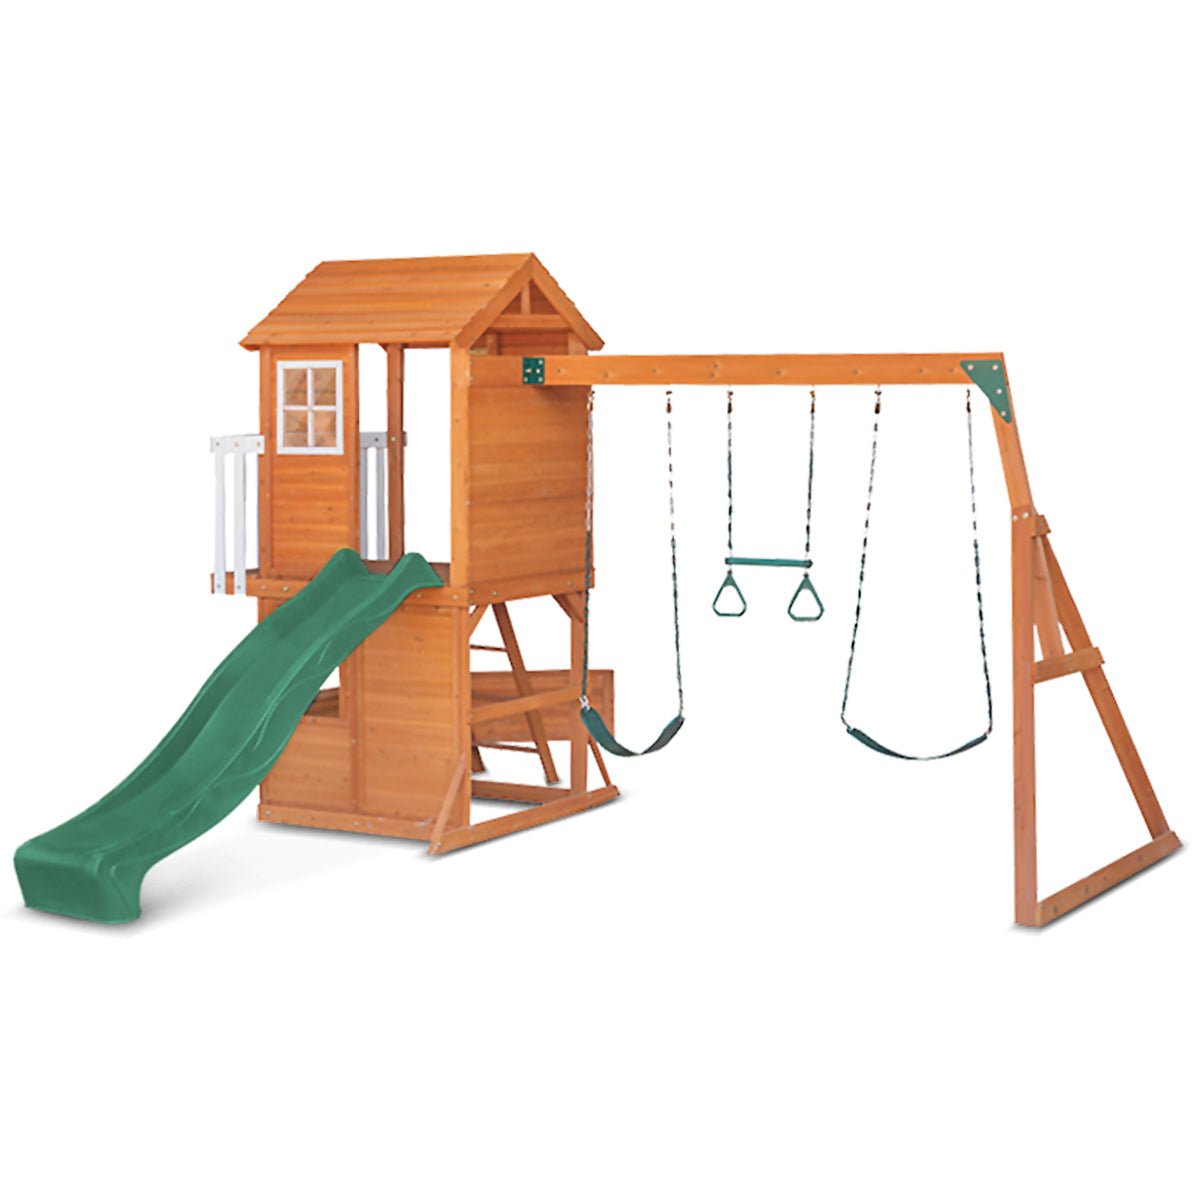 Shop Springlake Play Centre - Thrilling Adventures with Green Slide